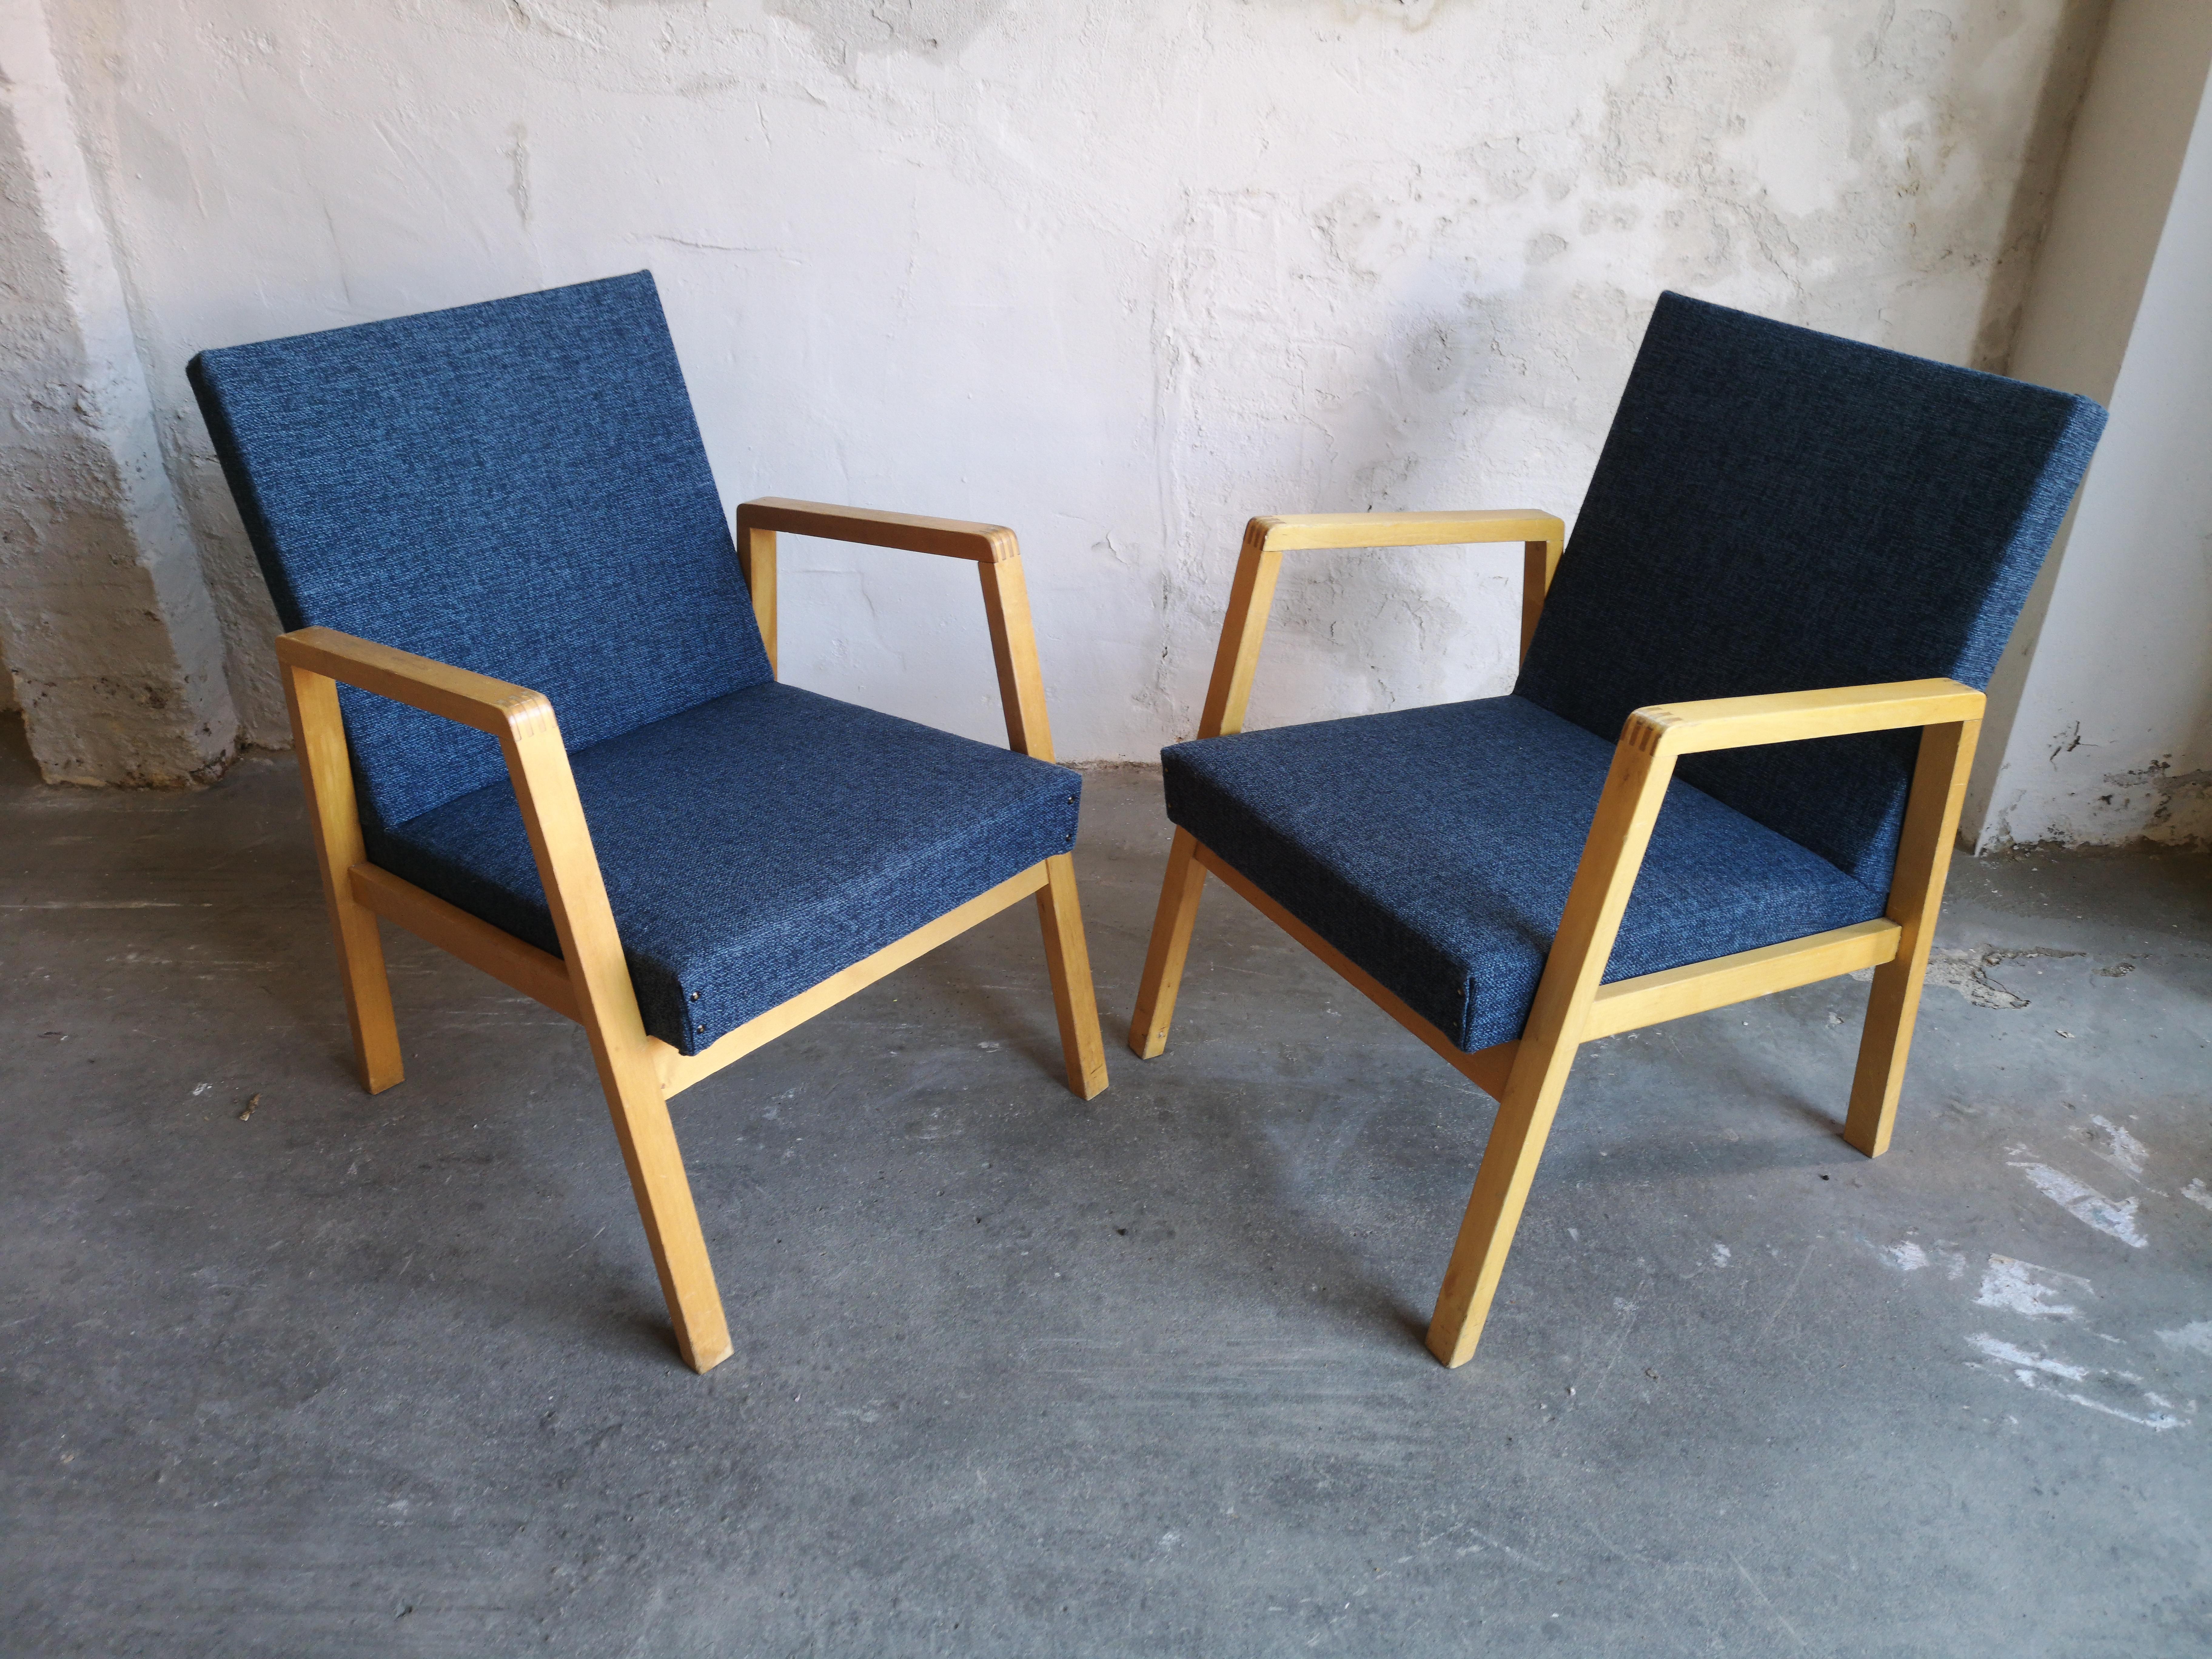 A stunning pair of stackable Alvar Aalto chair 54/404, a padded variant of hallway chair 403 designed in 1932. They are in excellent condition, recently refurbished.